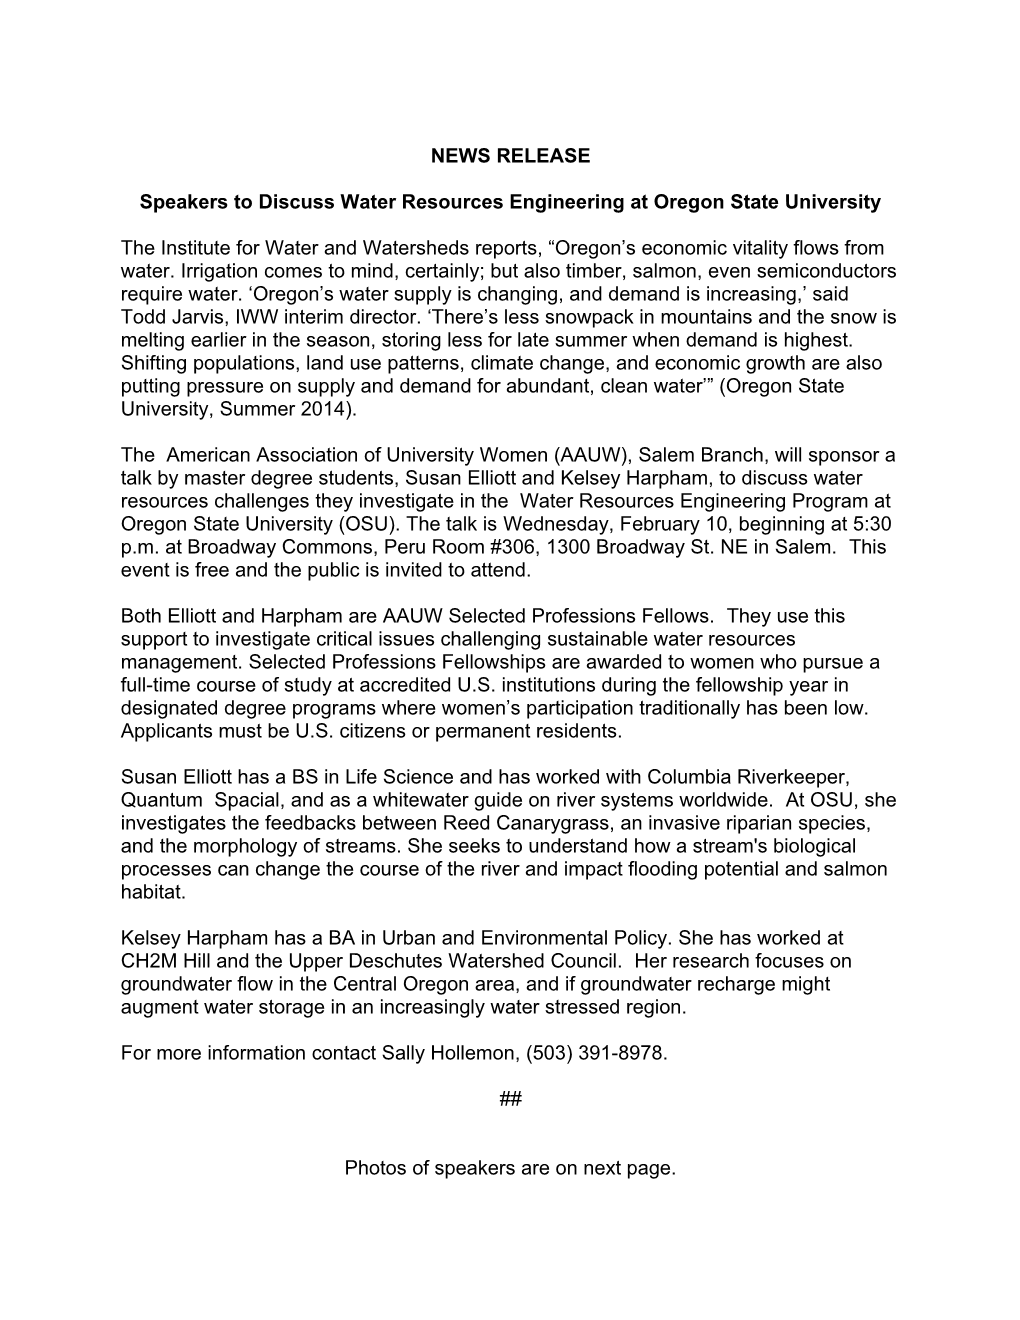 Speakers to Discuss Water Resources Engineering at Oregon State University